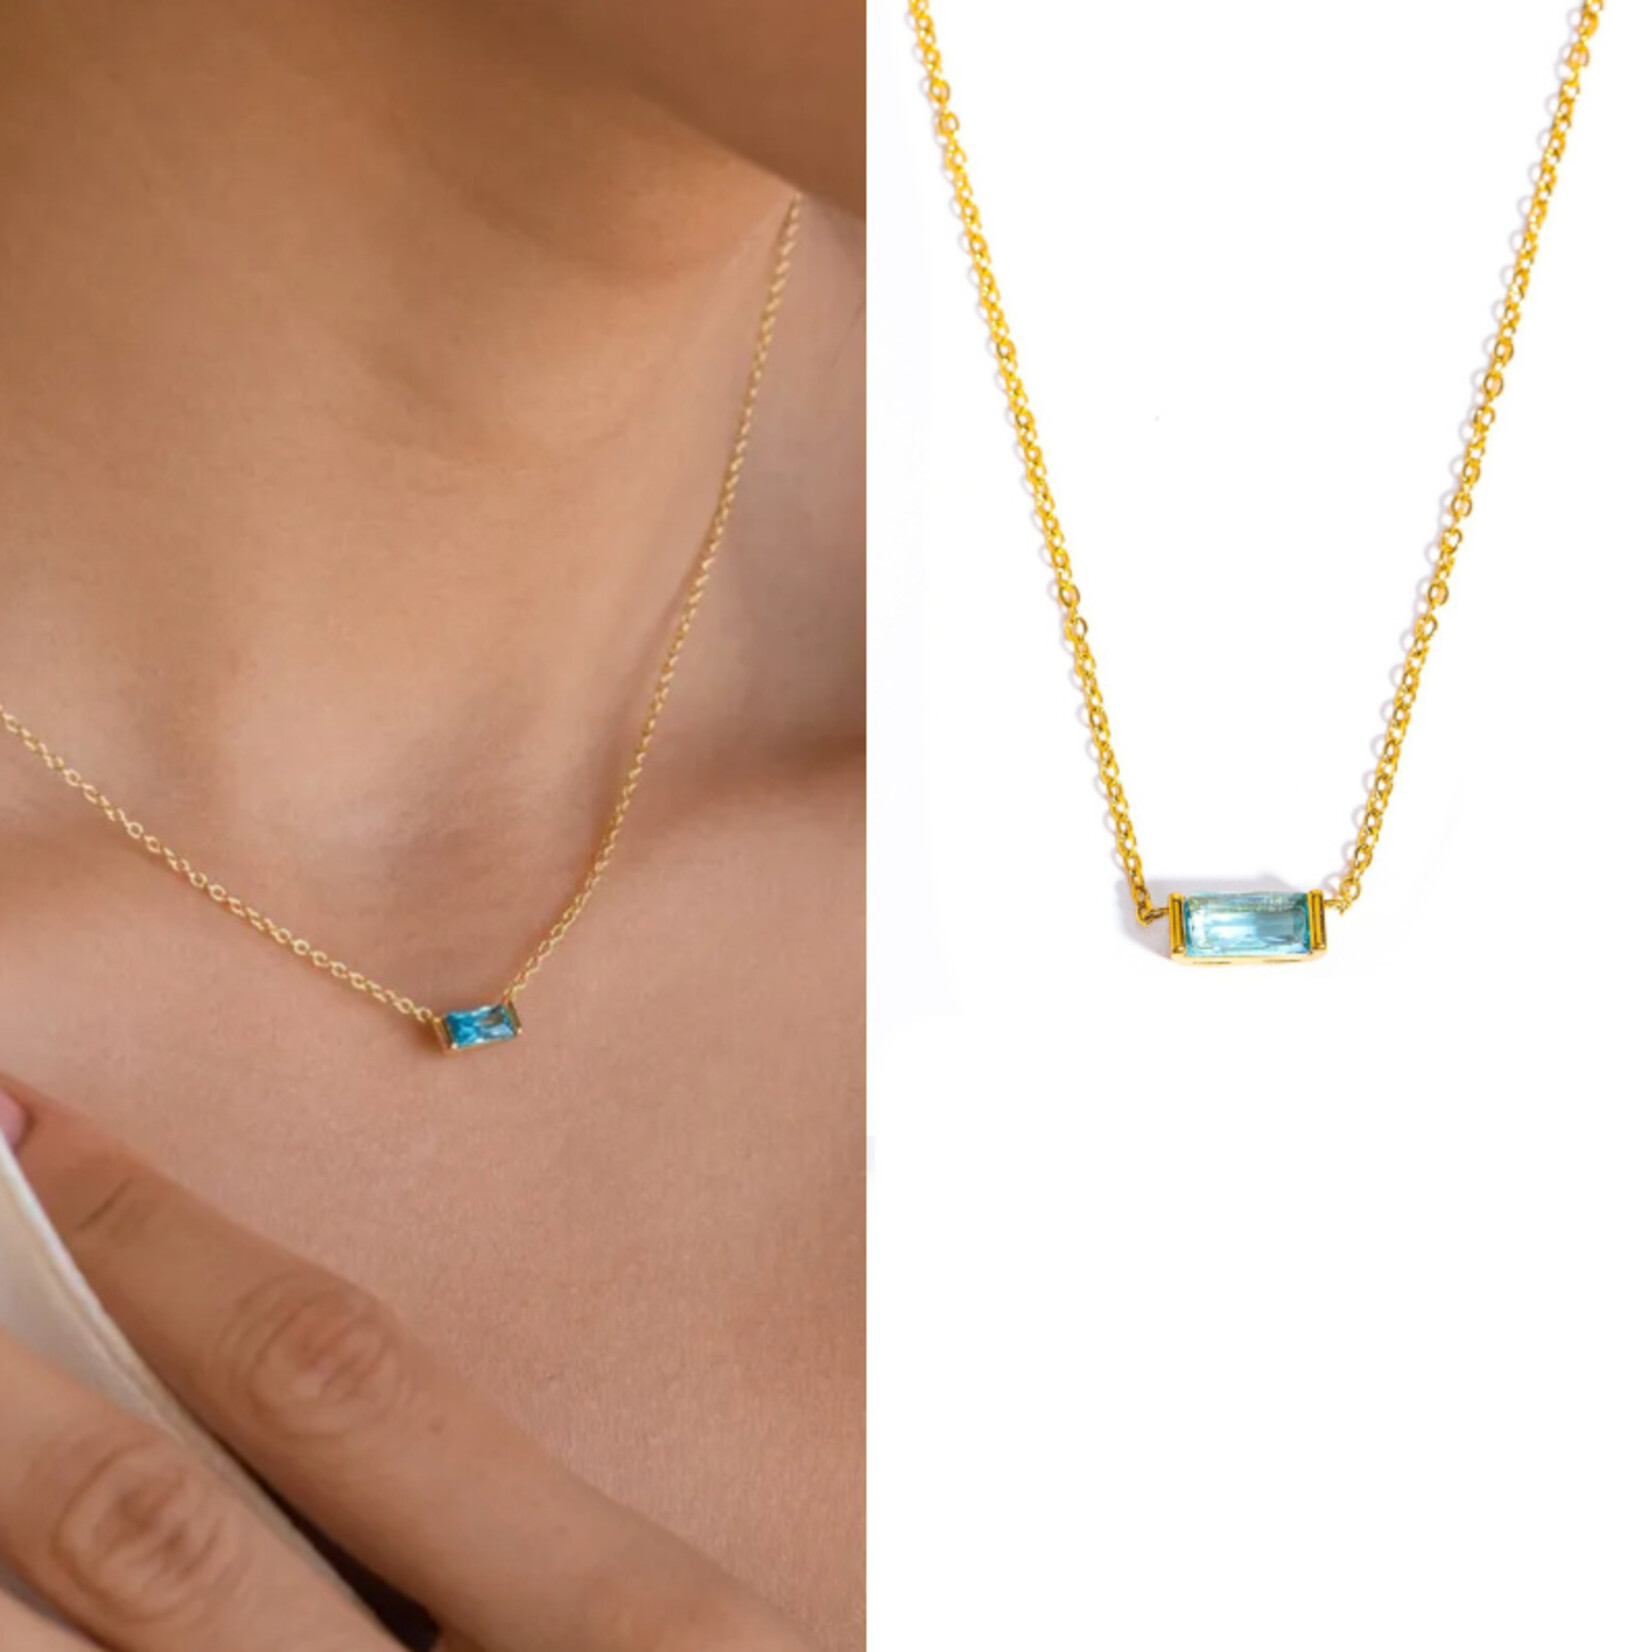 Carriez Aqua ketting gold plated stainless steel